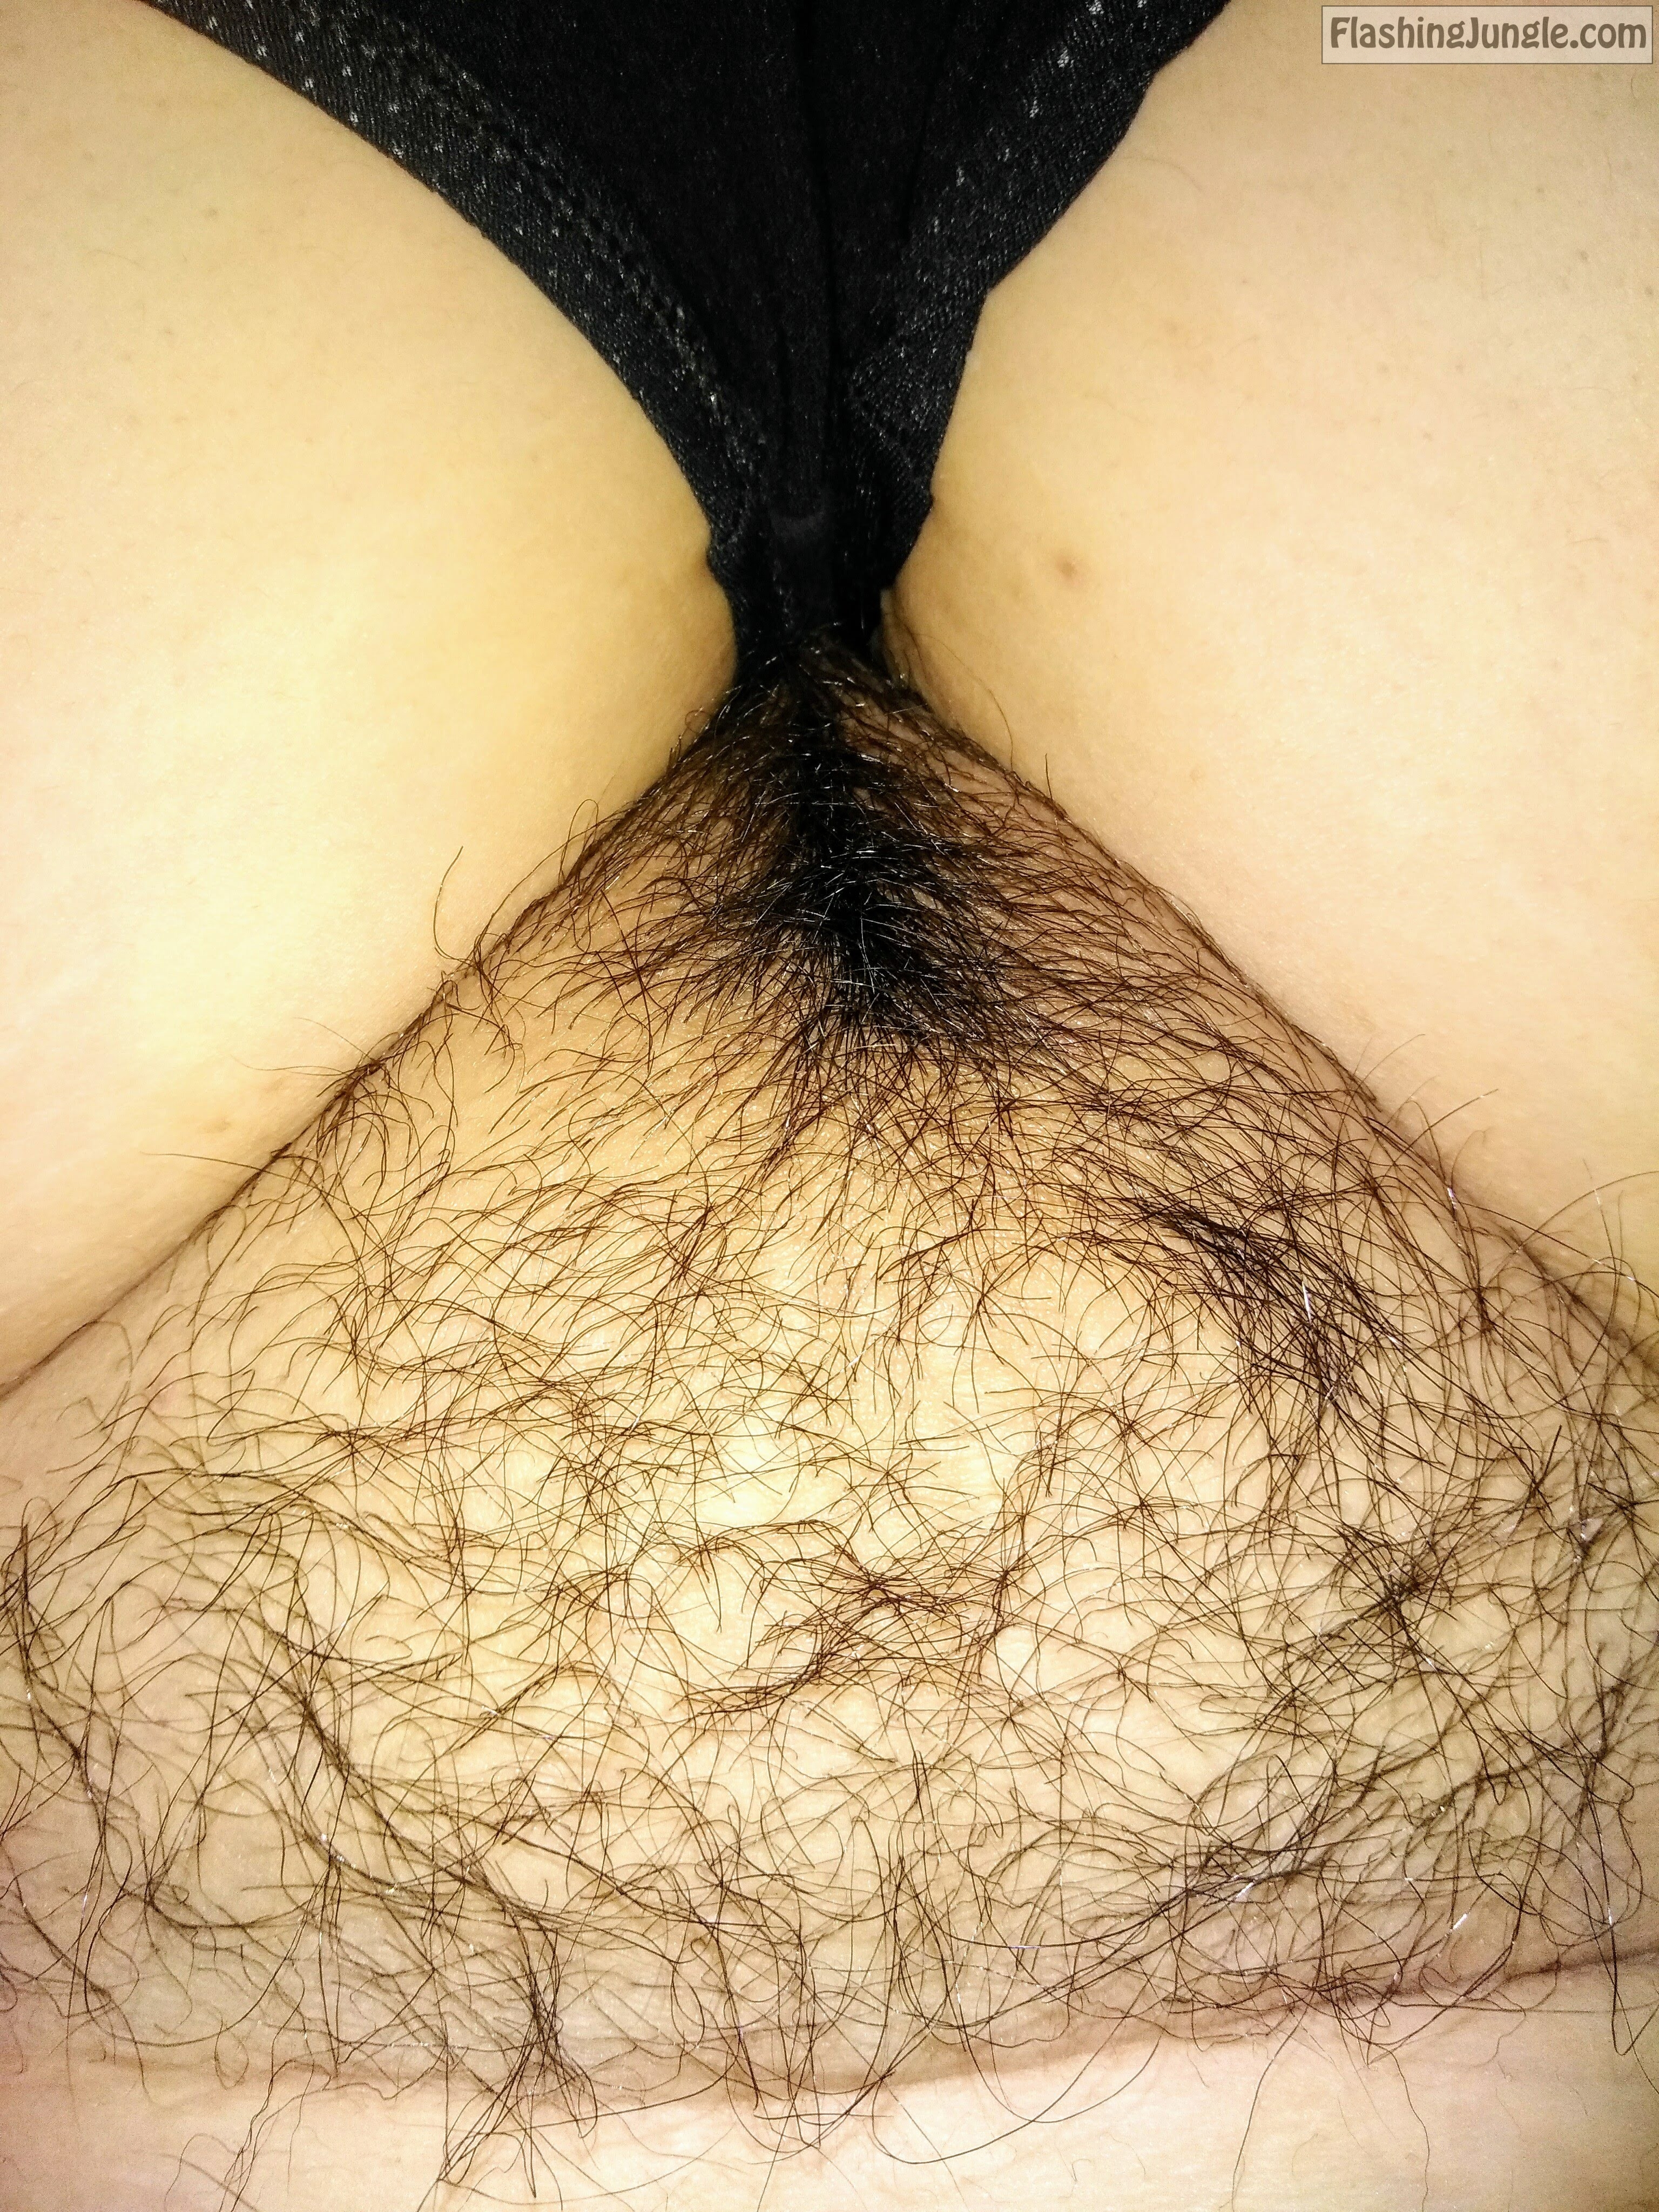 Sharing hairy cunt and swollen tits of my pregnant Desi wife Boobs Flash Pics, Pussy Flash Pics, Real Amateurs from Google, Tumblr, Pinterest, Facebook, Twitter, Instagram and Snapchat.